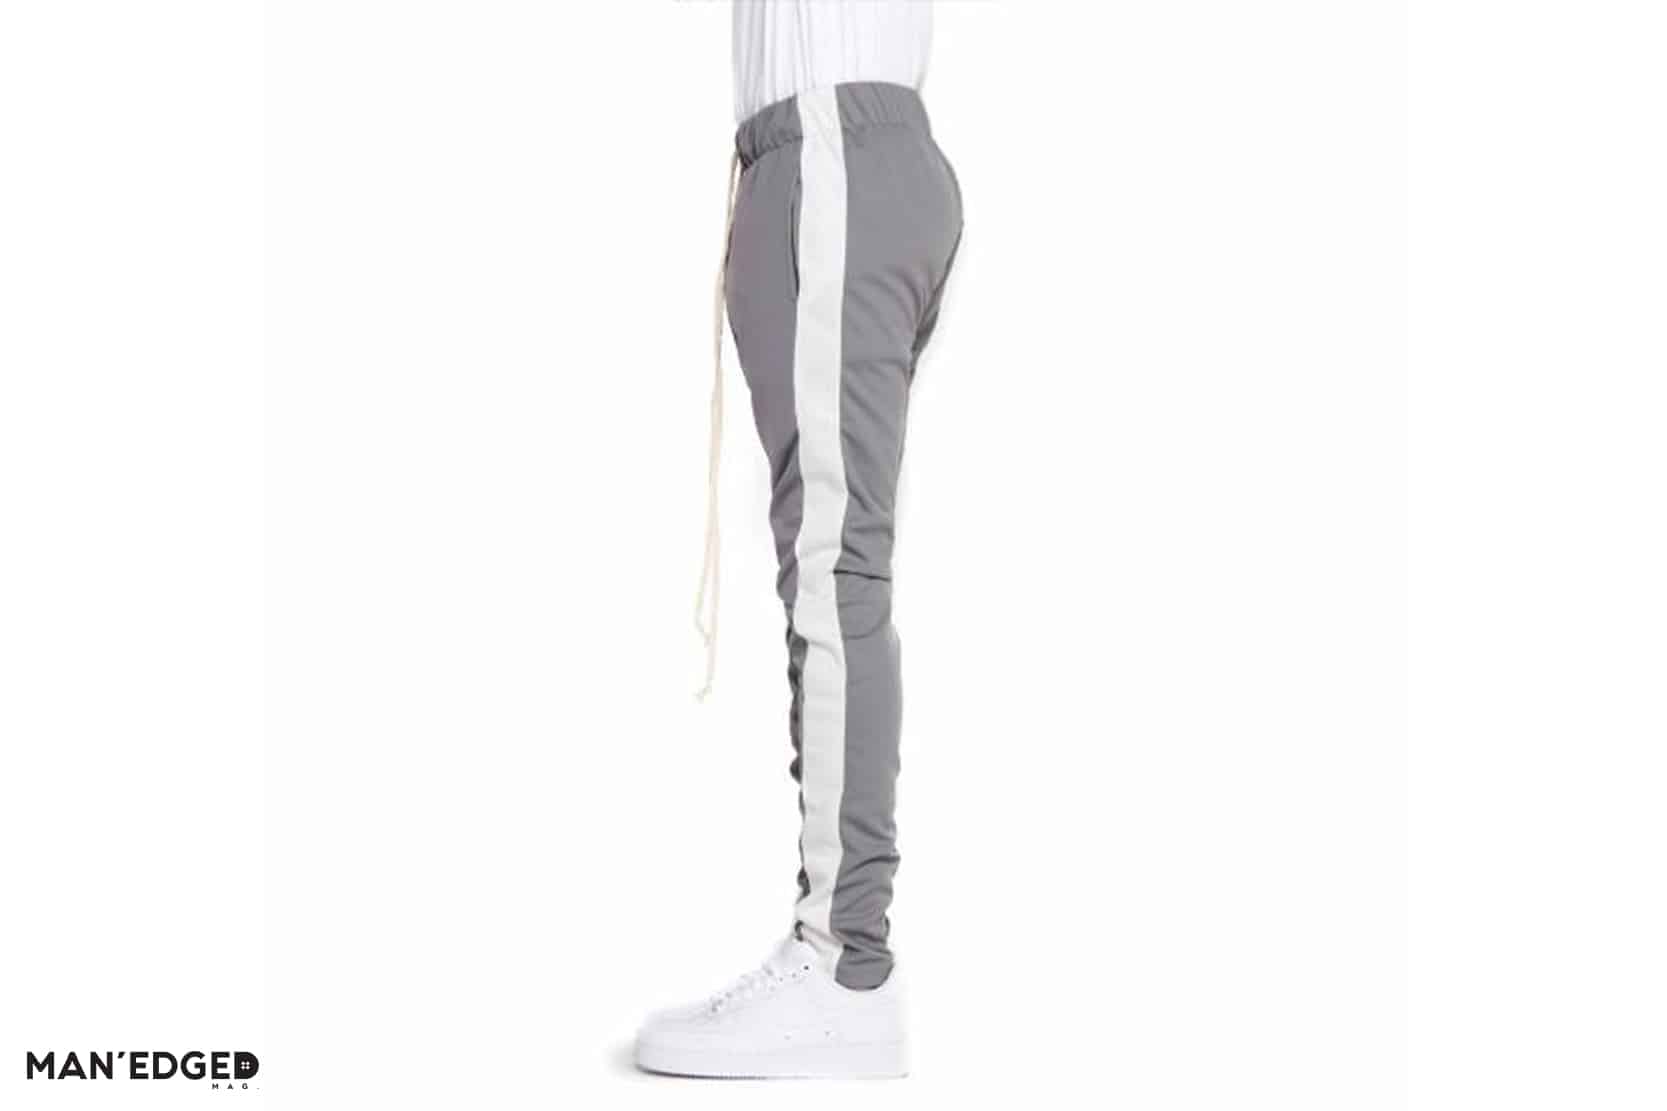 Gift ideas for the streetwear snob featuring Men's track pants by EPTM